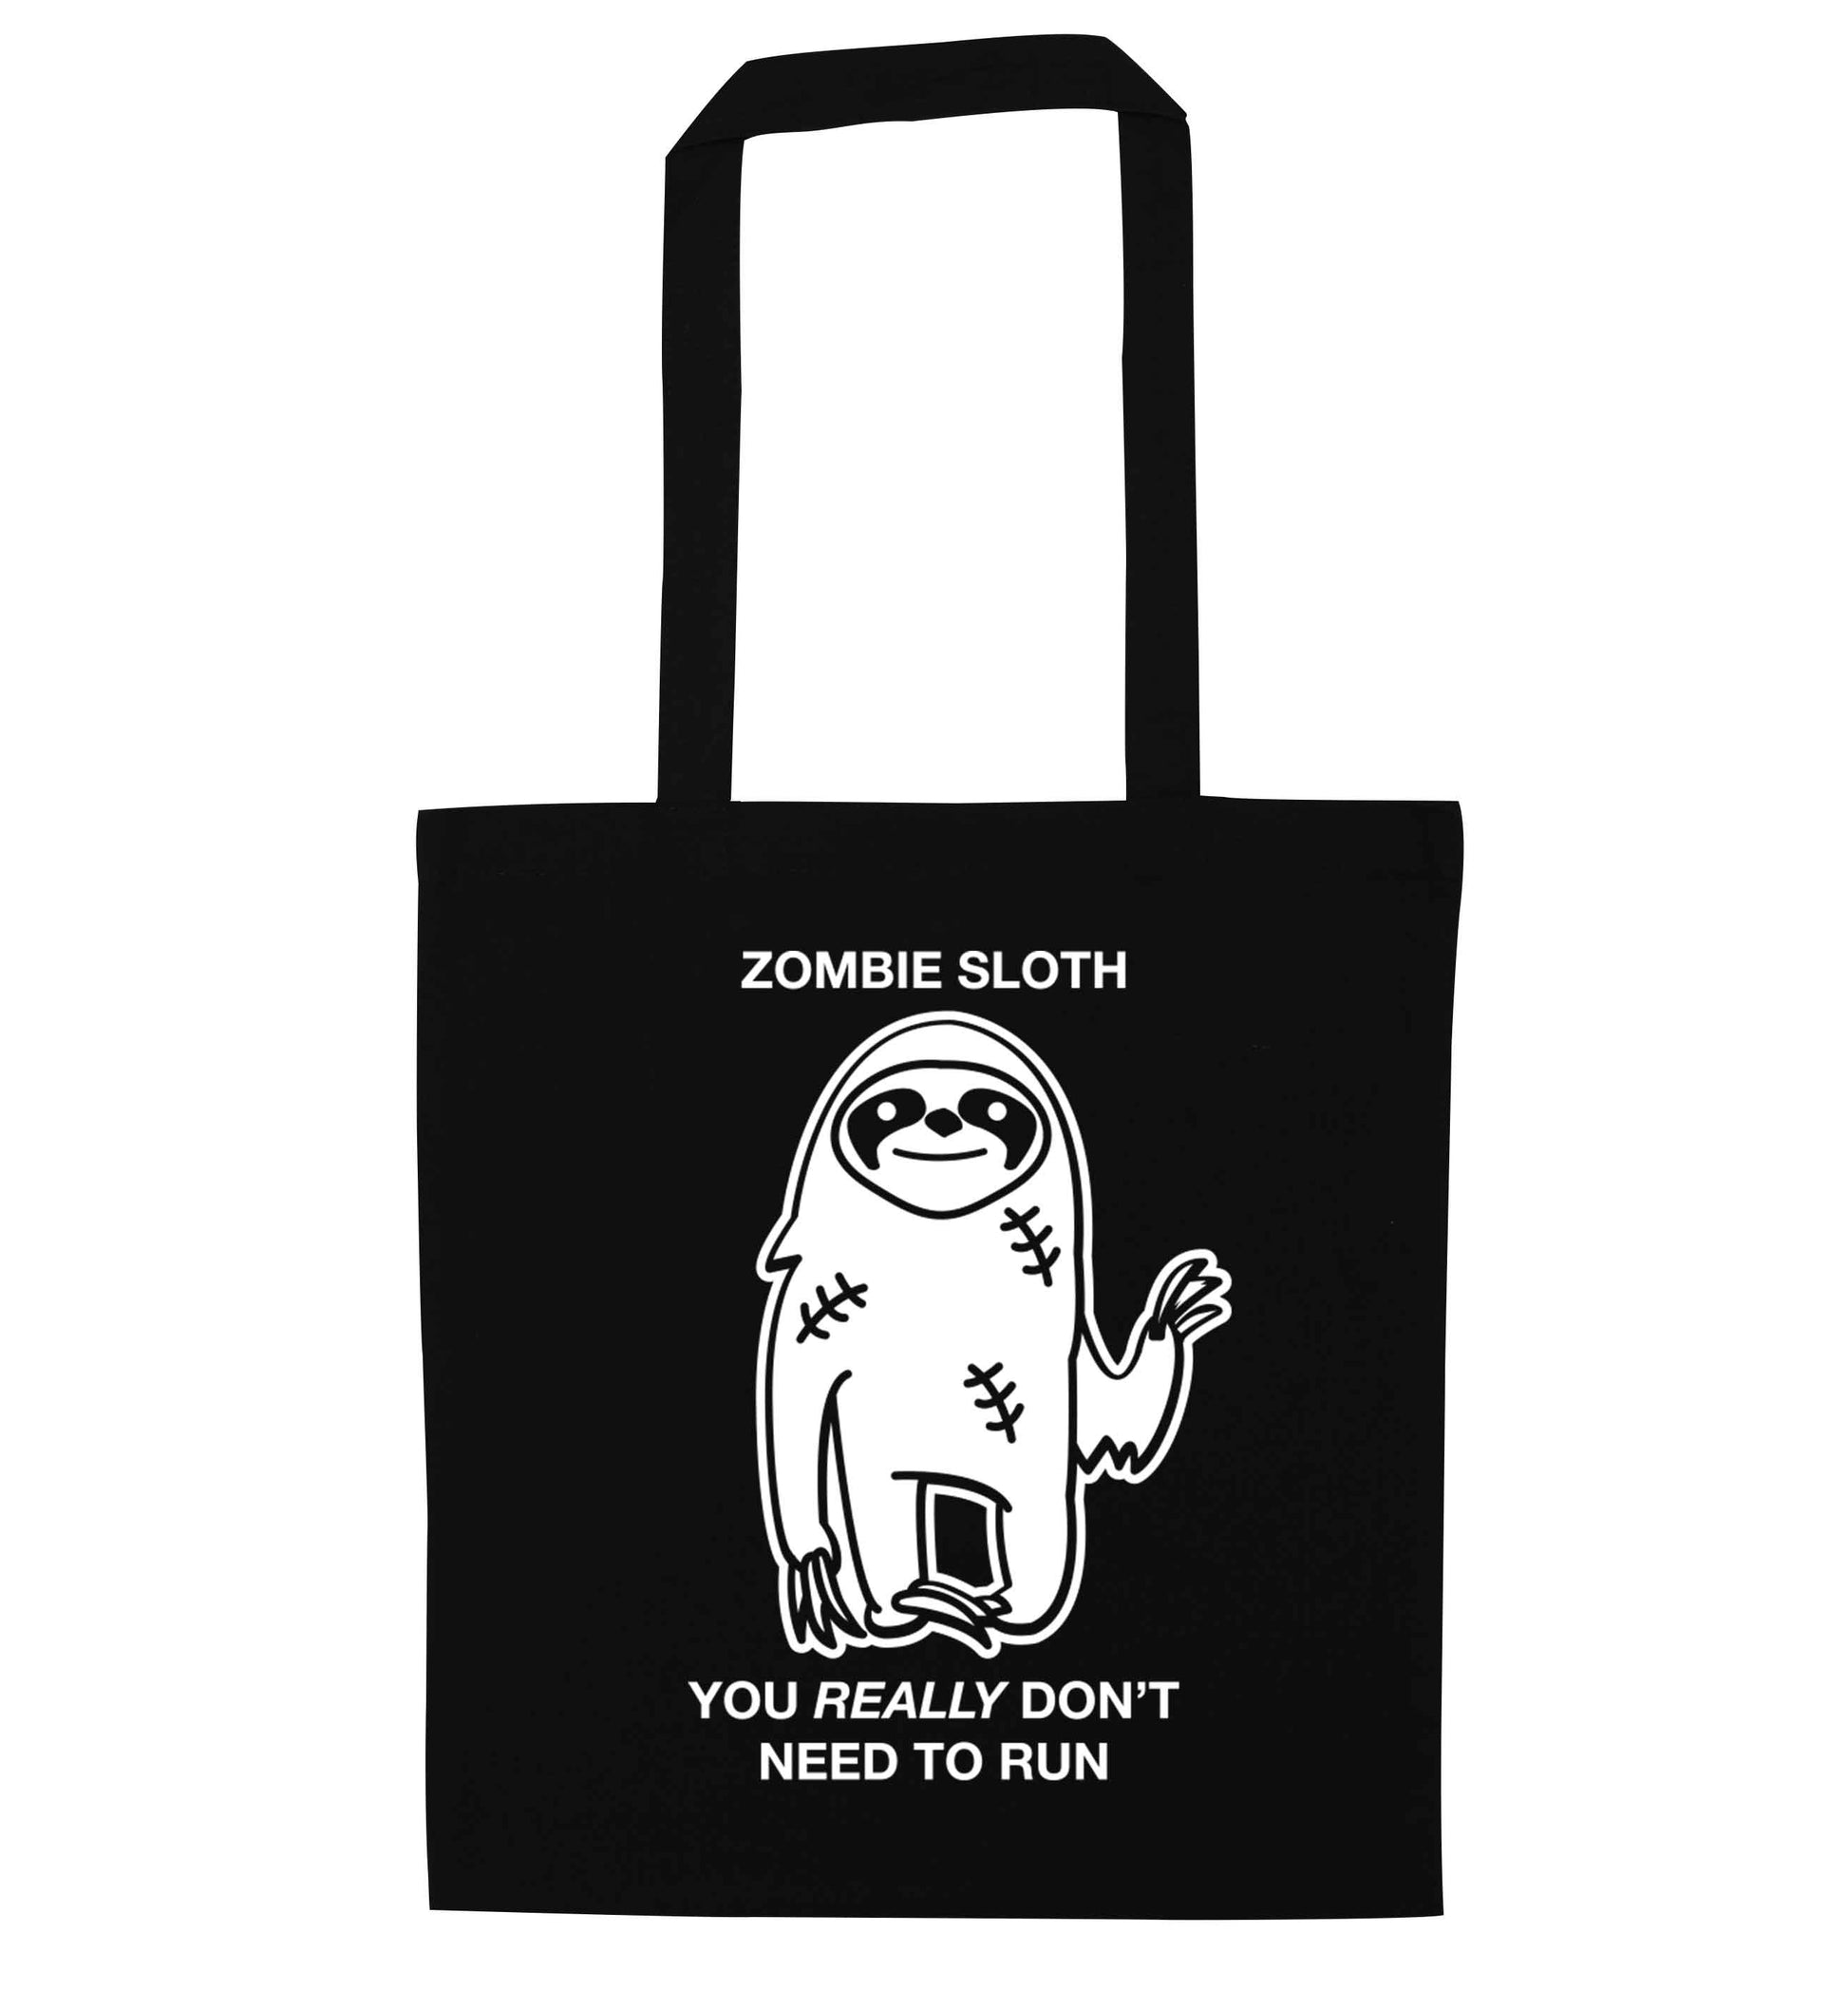 Zombie sloth you really don't need to run black tote bag